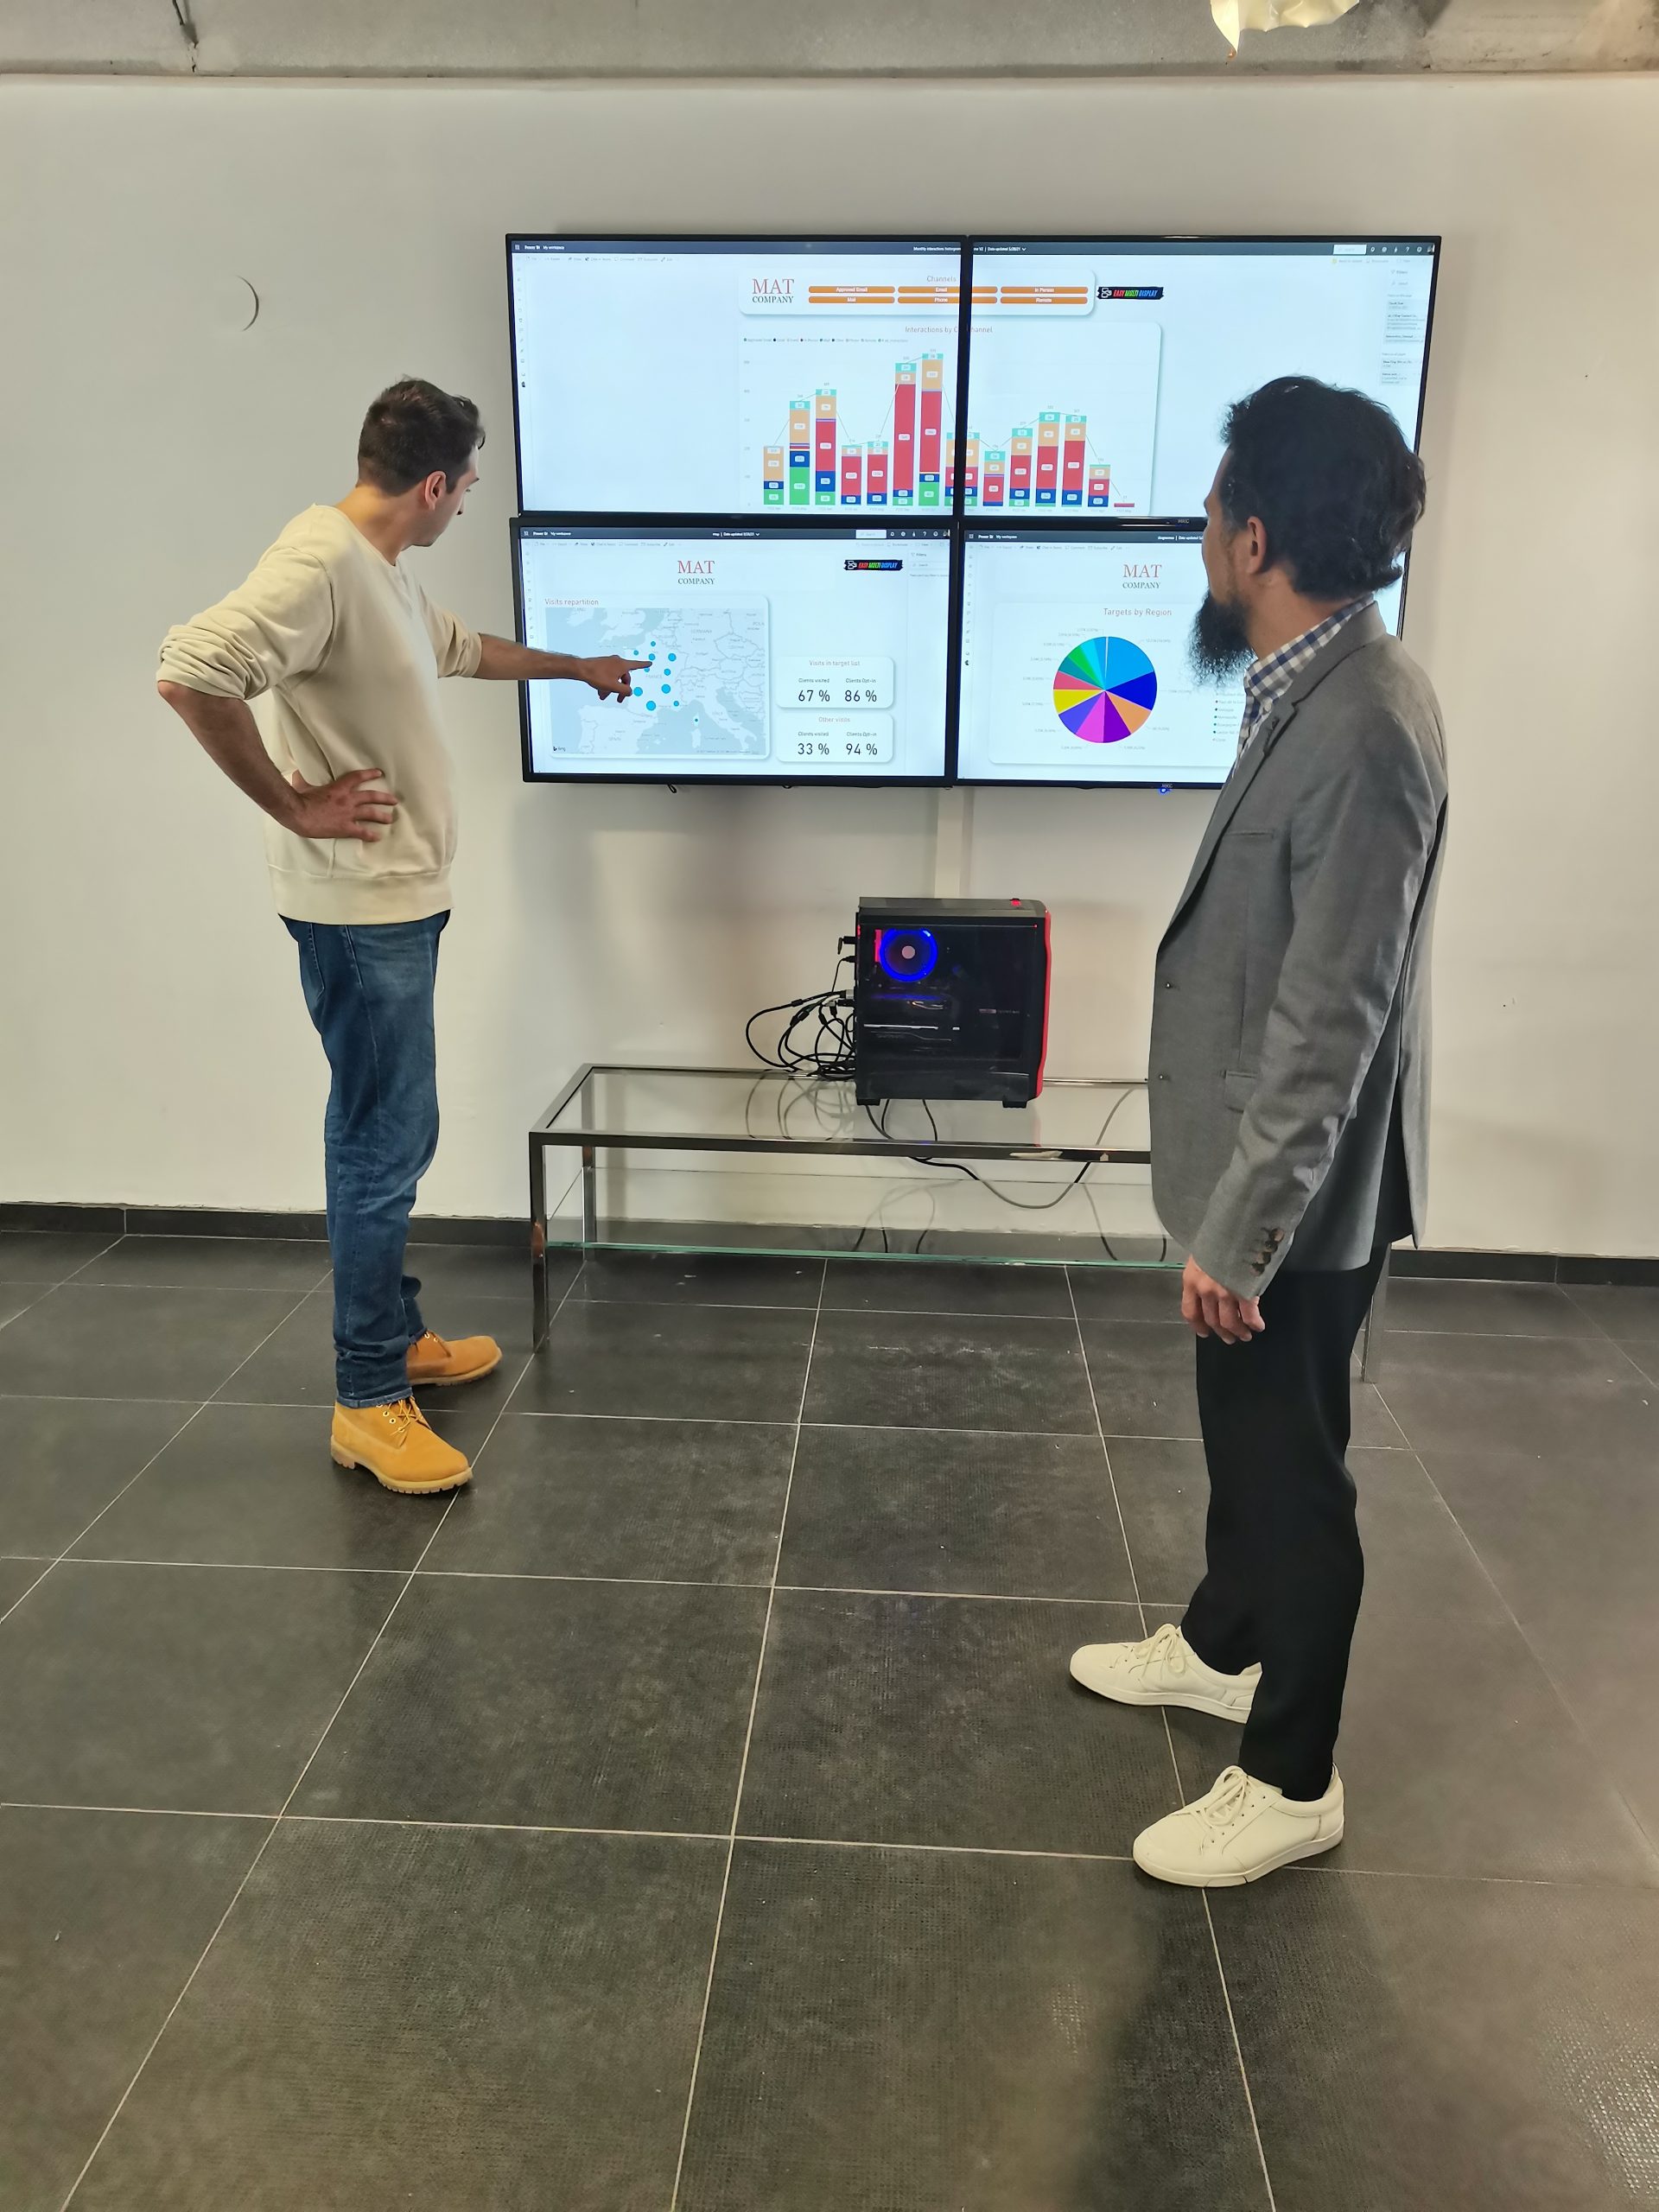 How Easy Multi Display can help you improve your data visualization?